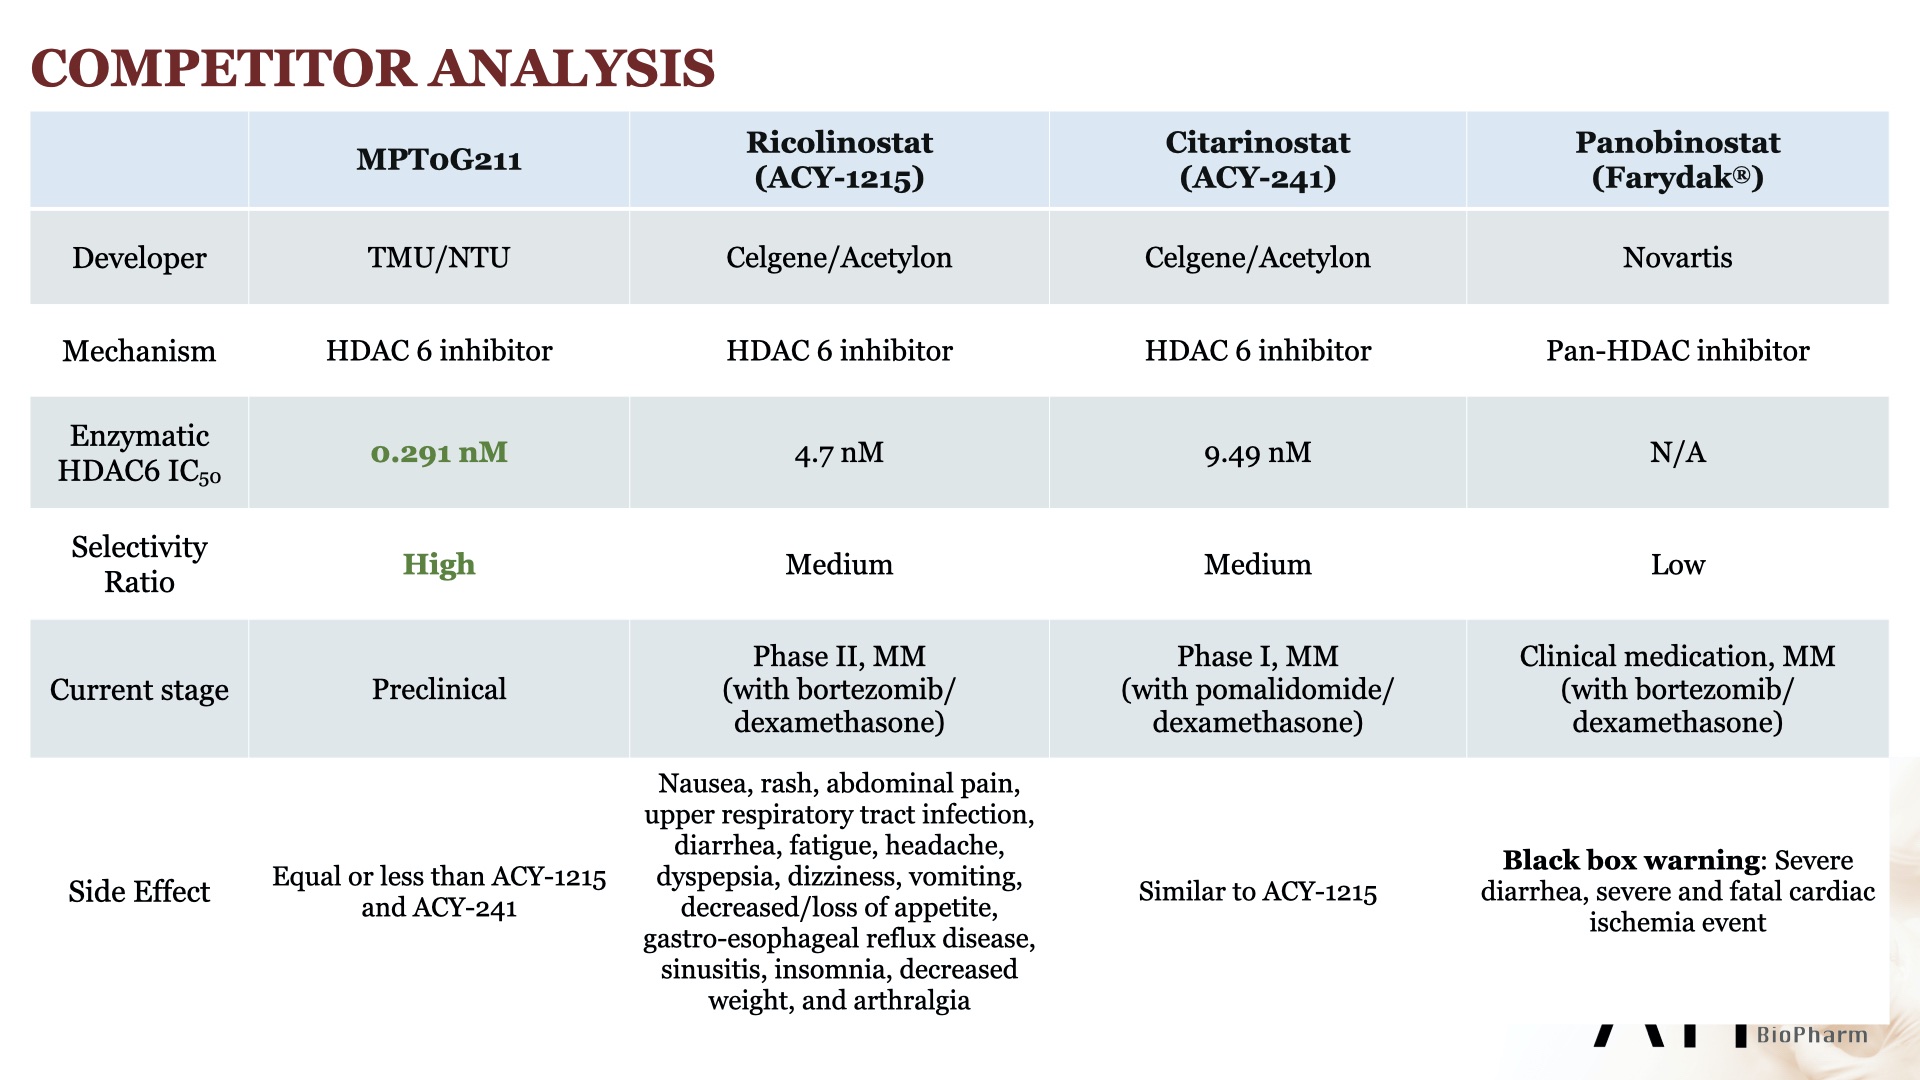 Drug Discovery of Development of Highly Selective HDAC6 Inhibitor MPT0G211